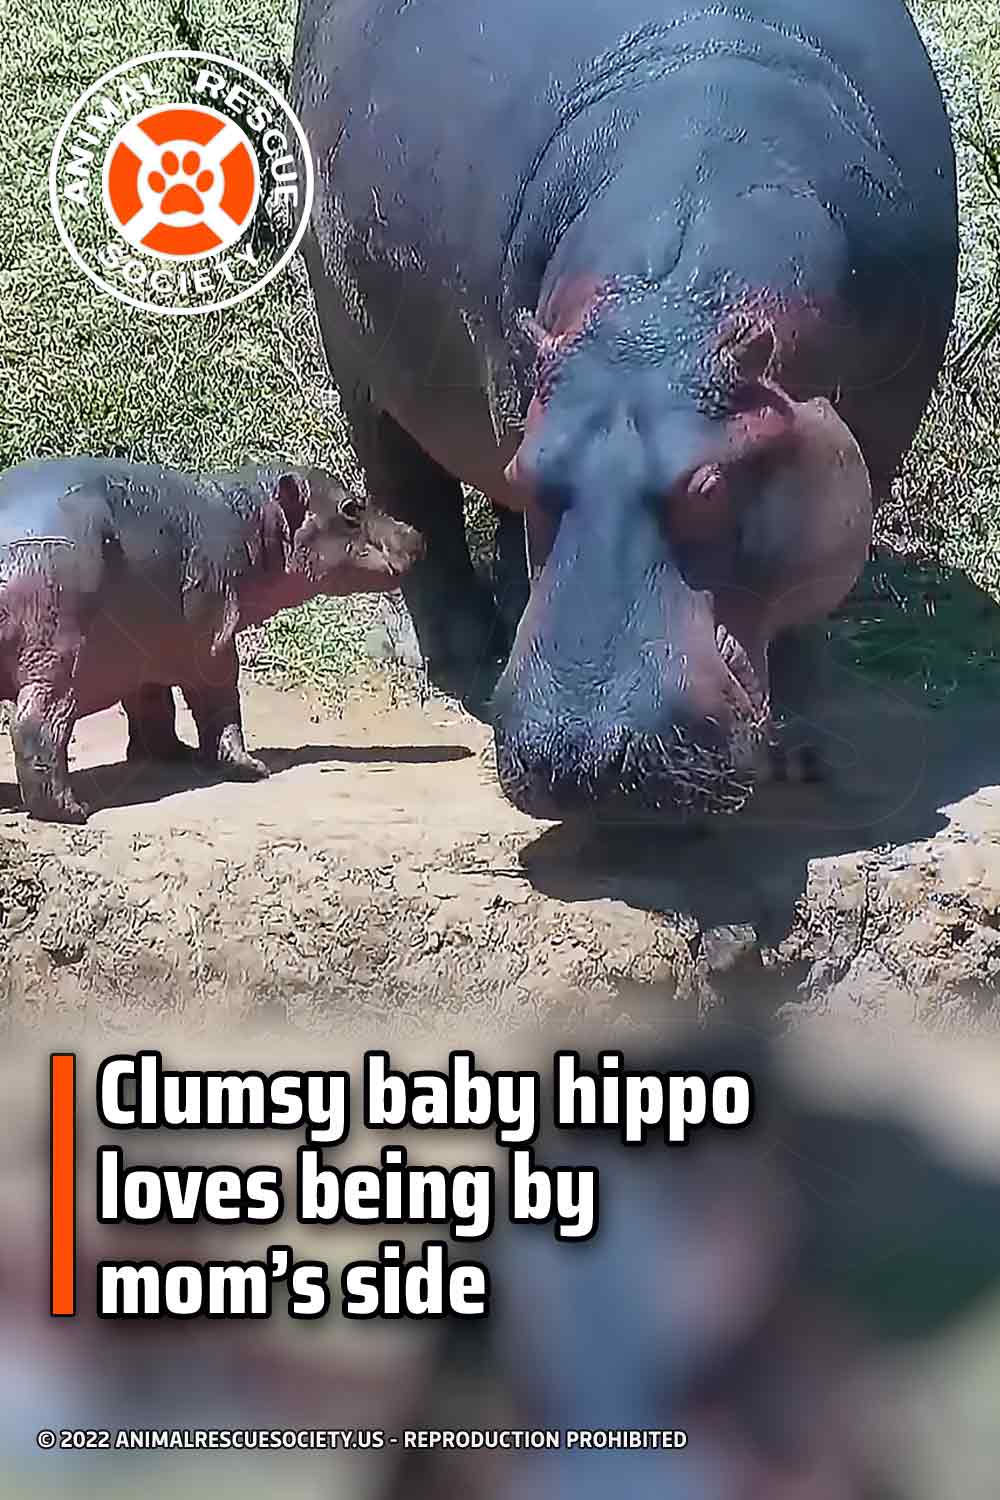 Clumsy baby hippo loves being by mom’s side